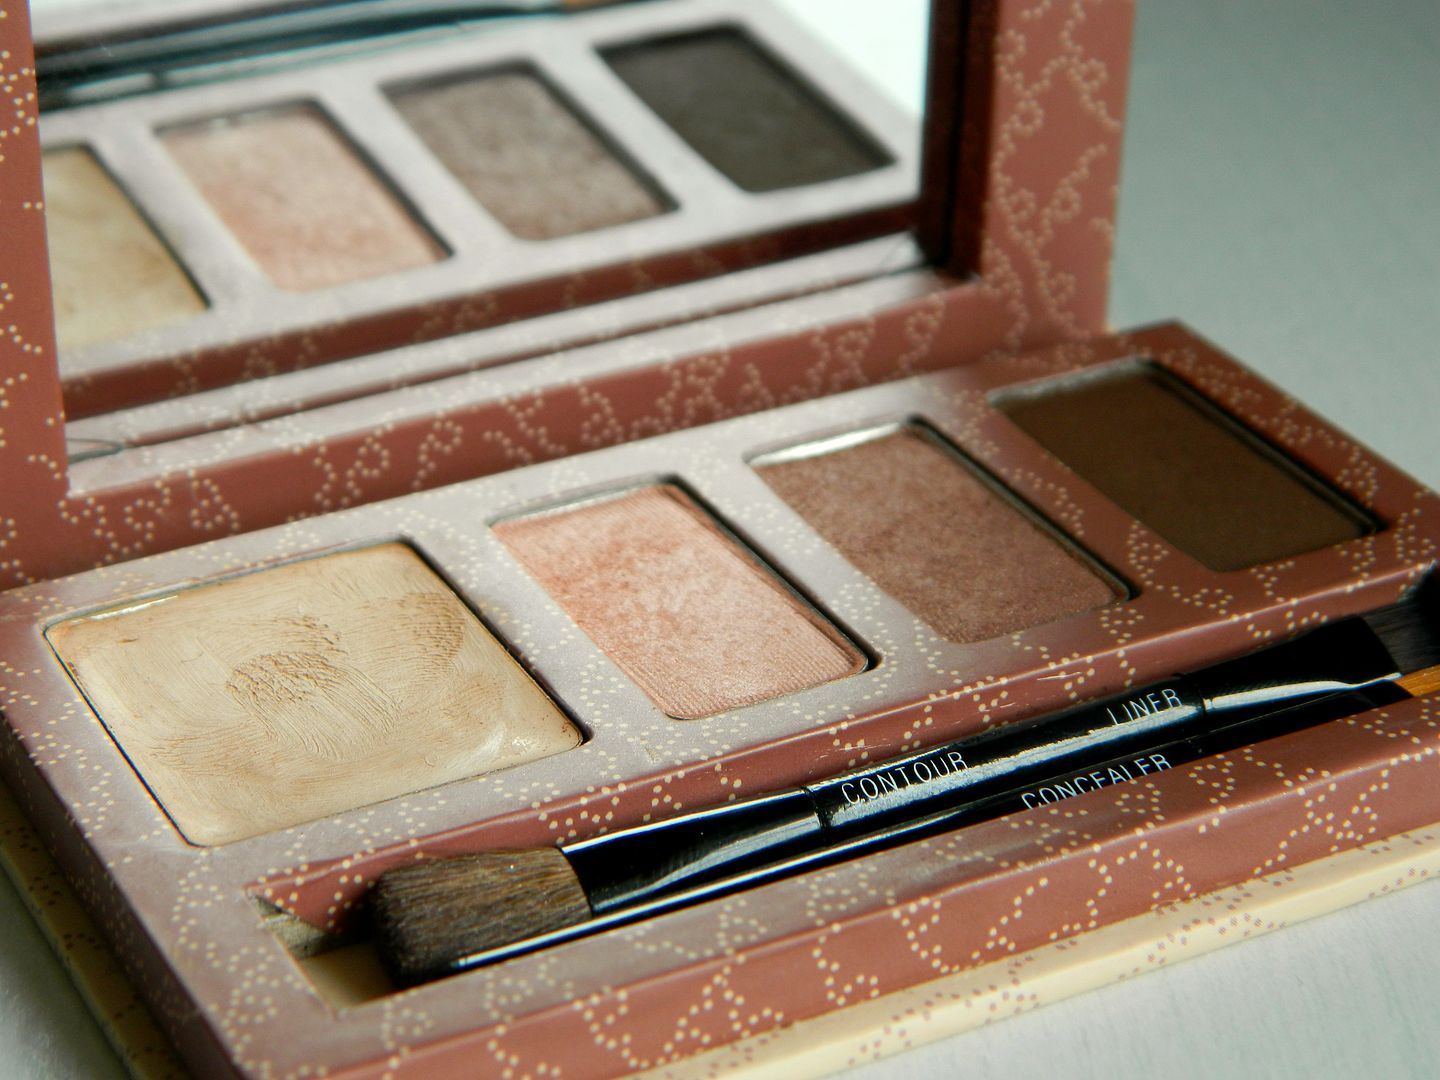 Benefit Big Beautiful Eyes Shades Palette Review Belle-amie